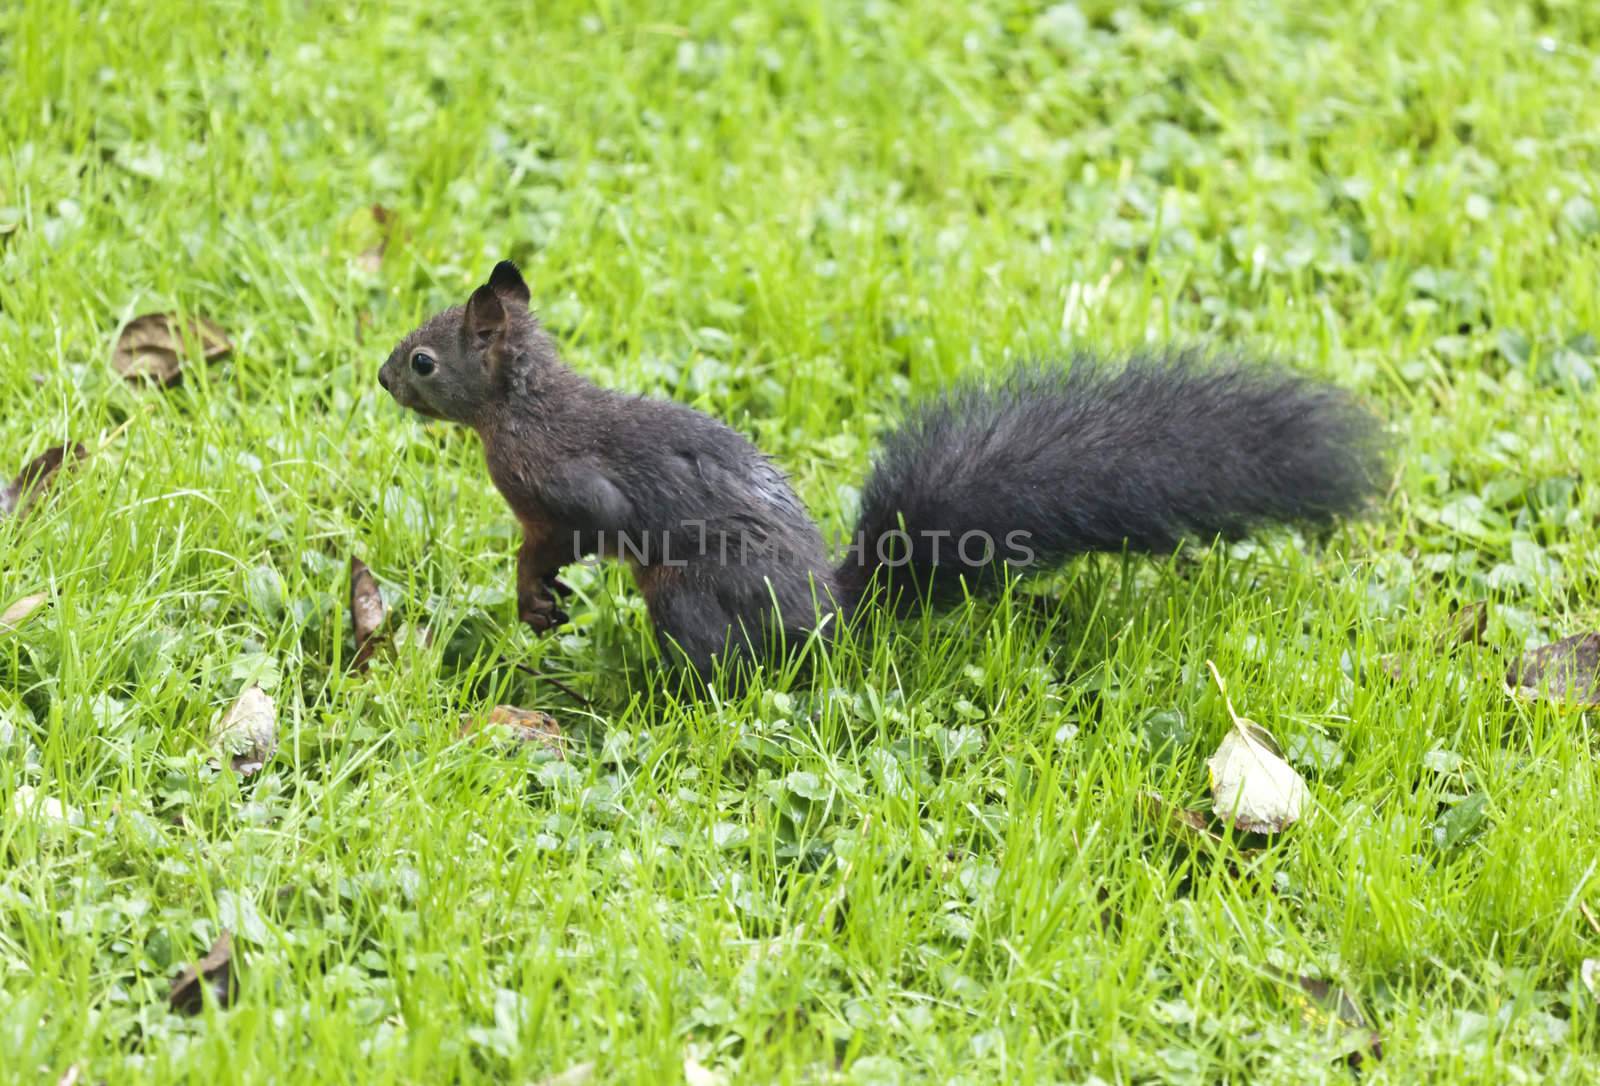 An image of a young squirrel in the wet grass